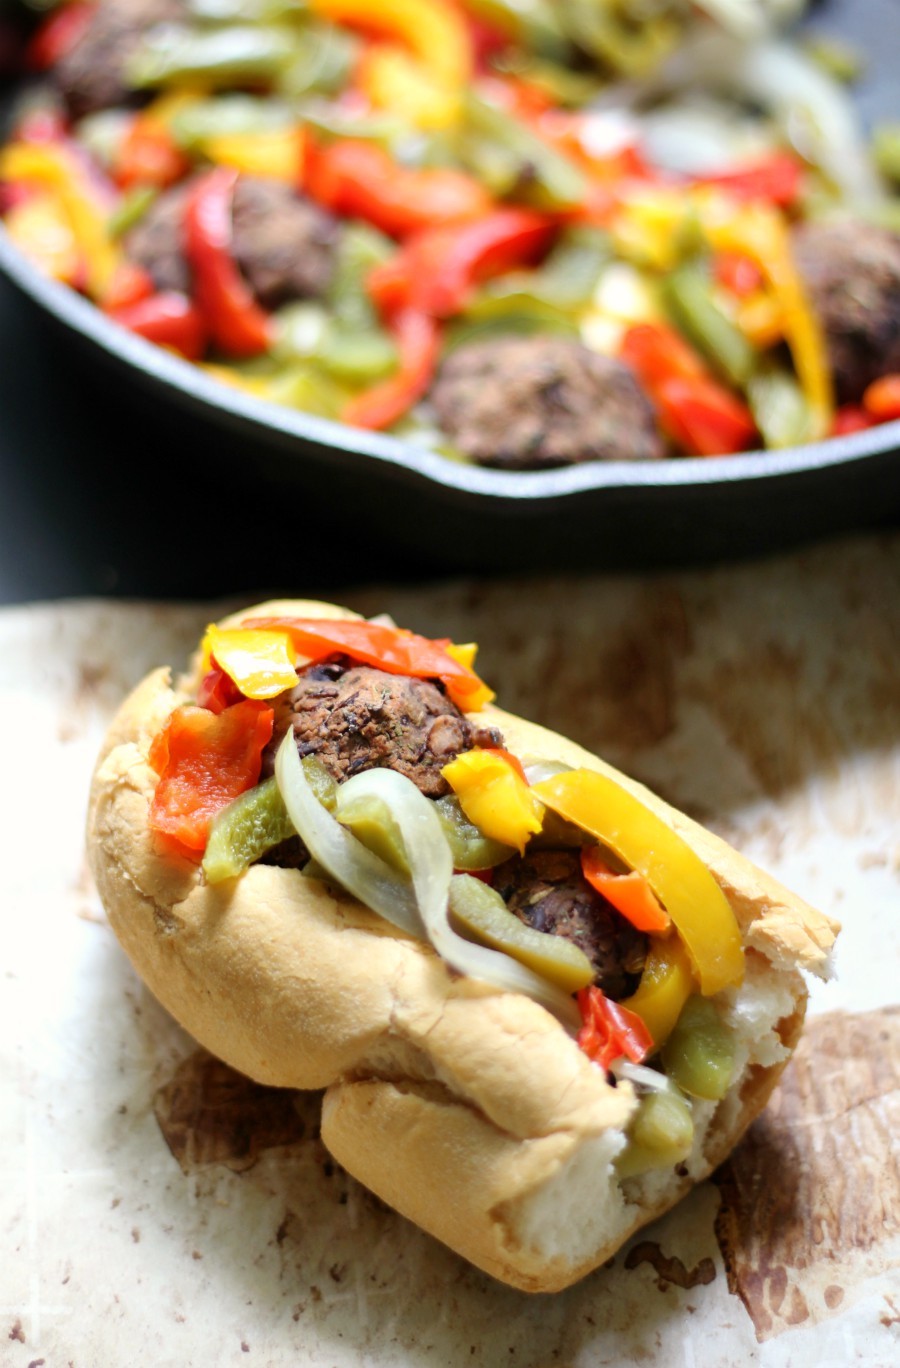 Vegan Boardwalk Italian Sausage & Peppers Sandwiches (Gluten-Free, Allergy-Free) | Strength and Sunshine @RebeccaGF666 A Jersey Shore classic! These meatless Boardwalk Italian Sausage & Peppers Sandwiches are vegan, gluten-free, and top 8 allergy-free! A simple, delicious, and healthy recipe for your greasy favorite summer comfort food! 